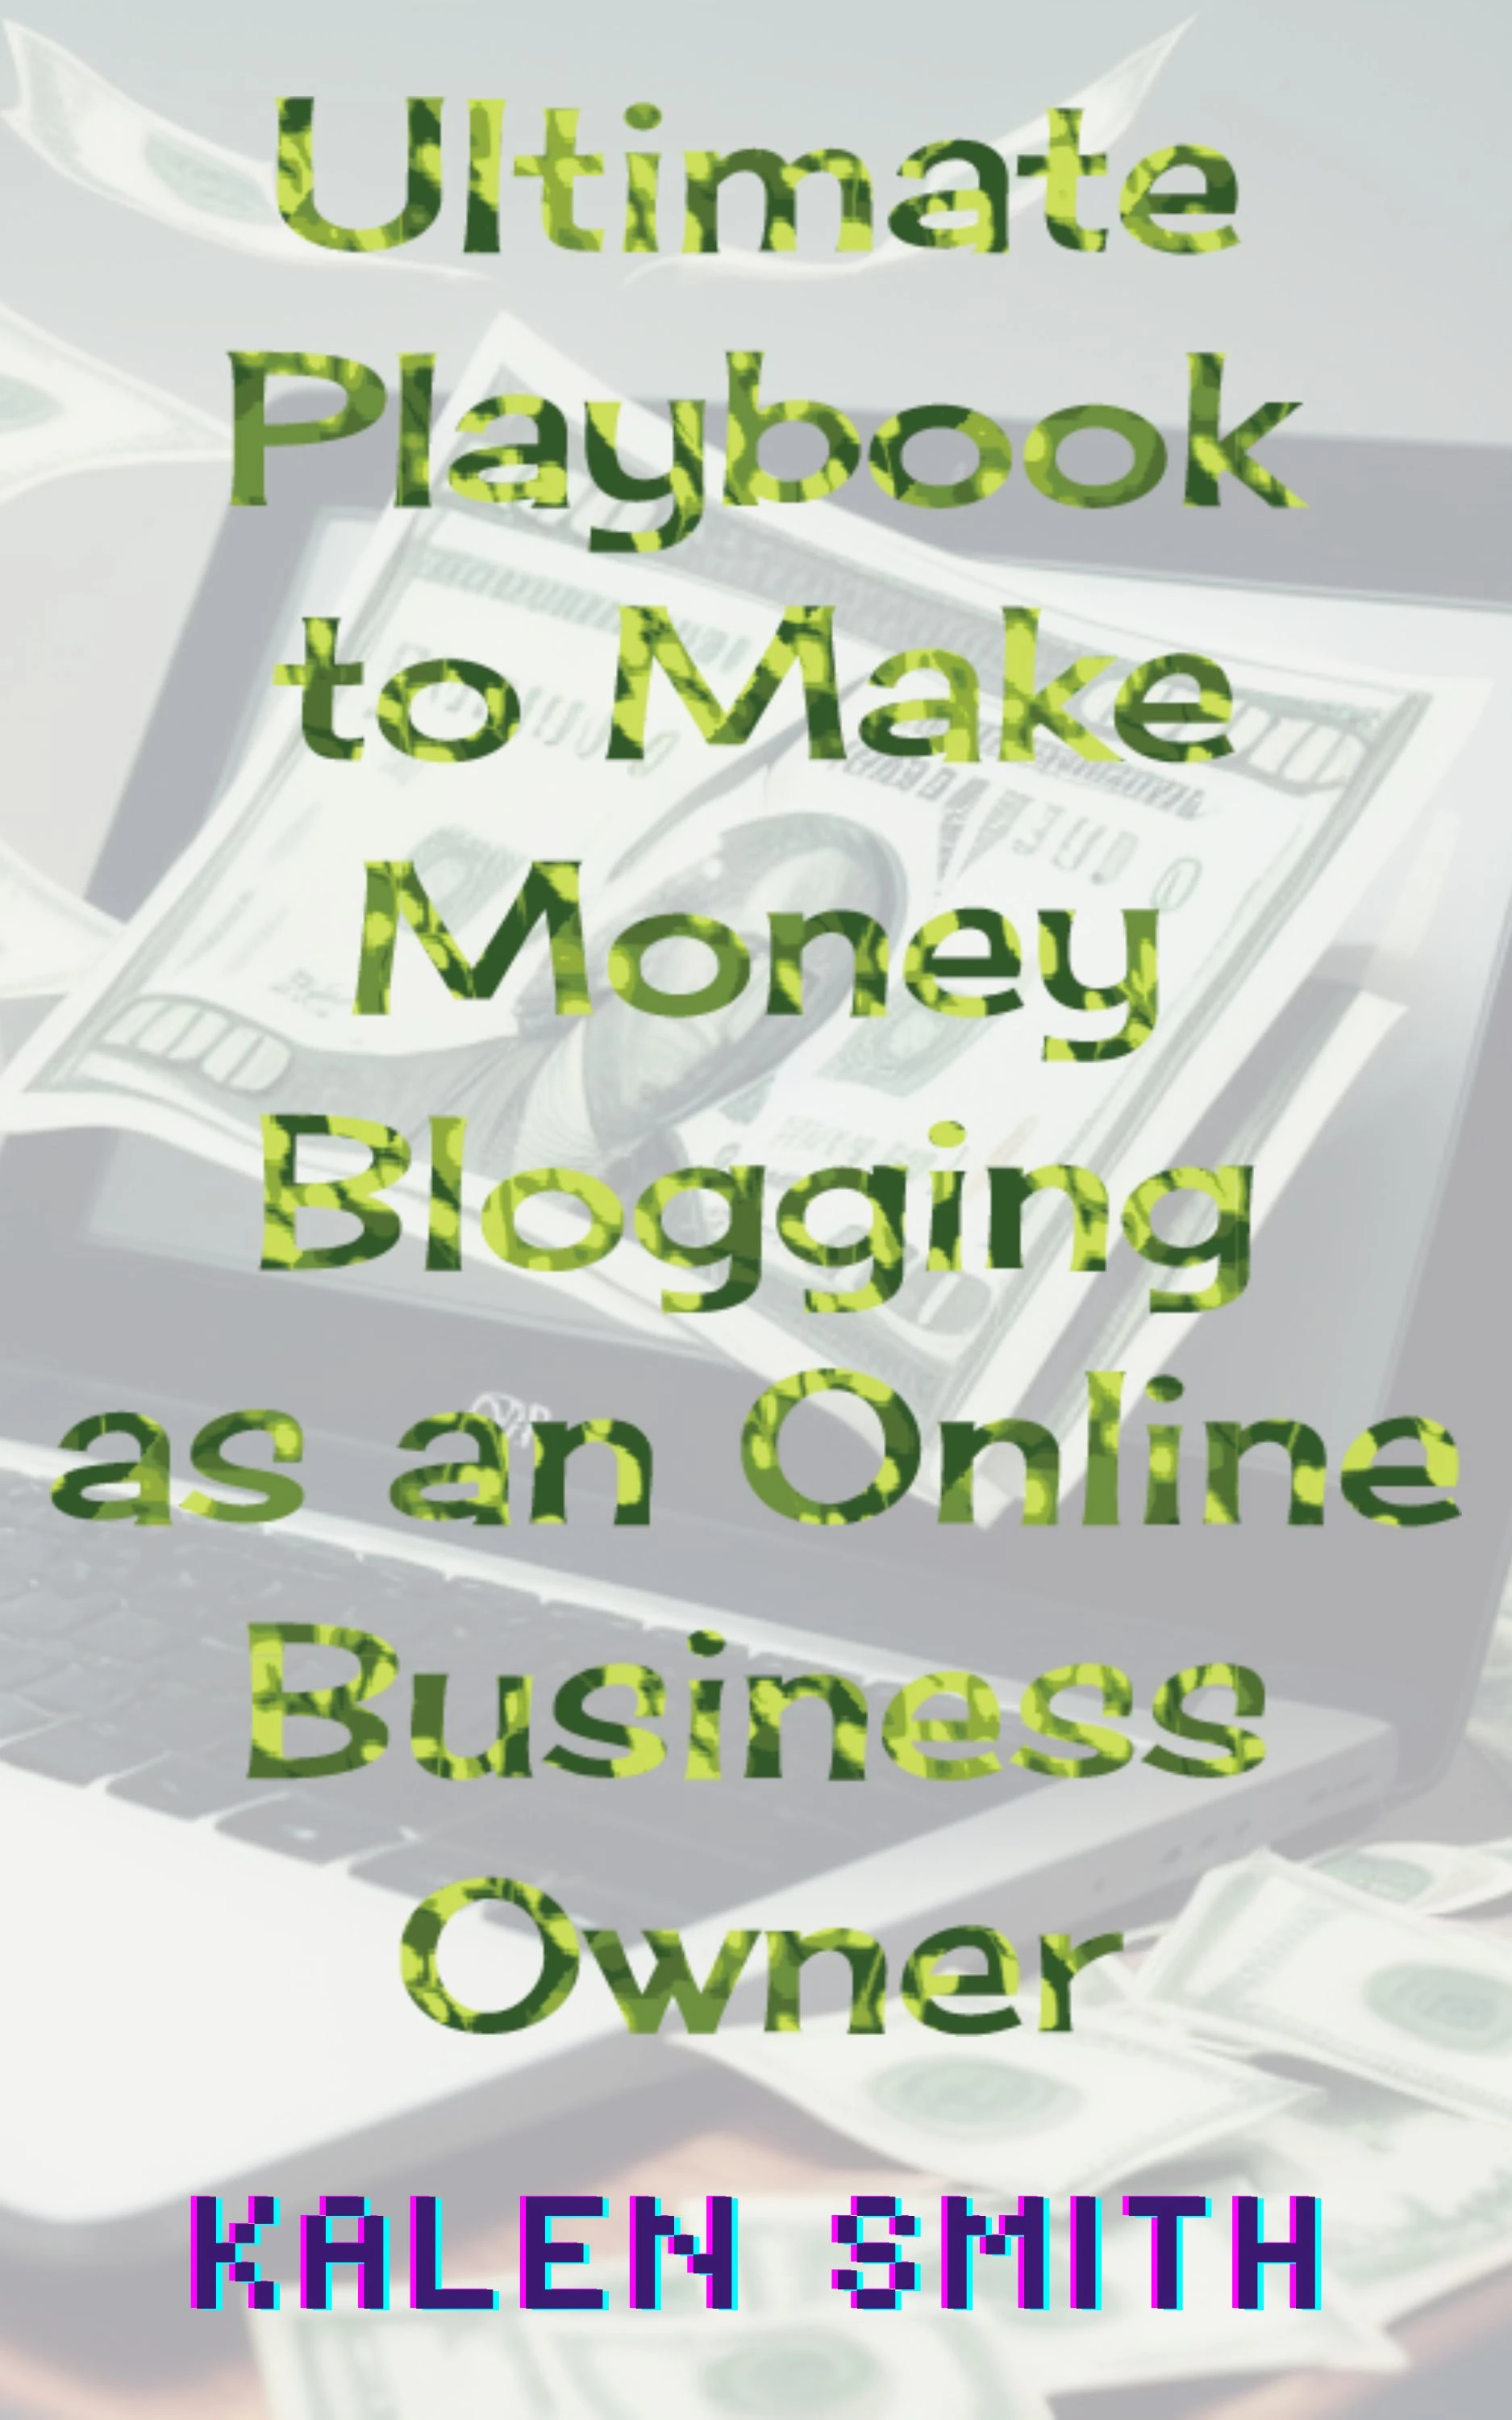 Ultimate Playbook to Make Money Blogging as an Online Business Owner